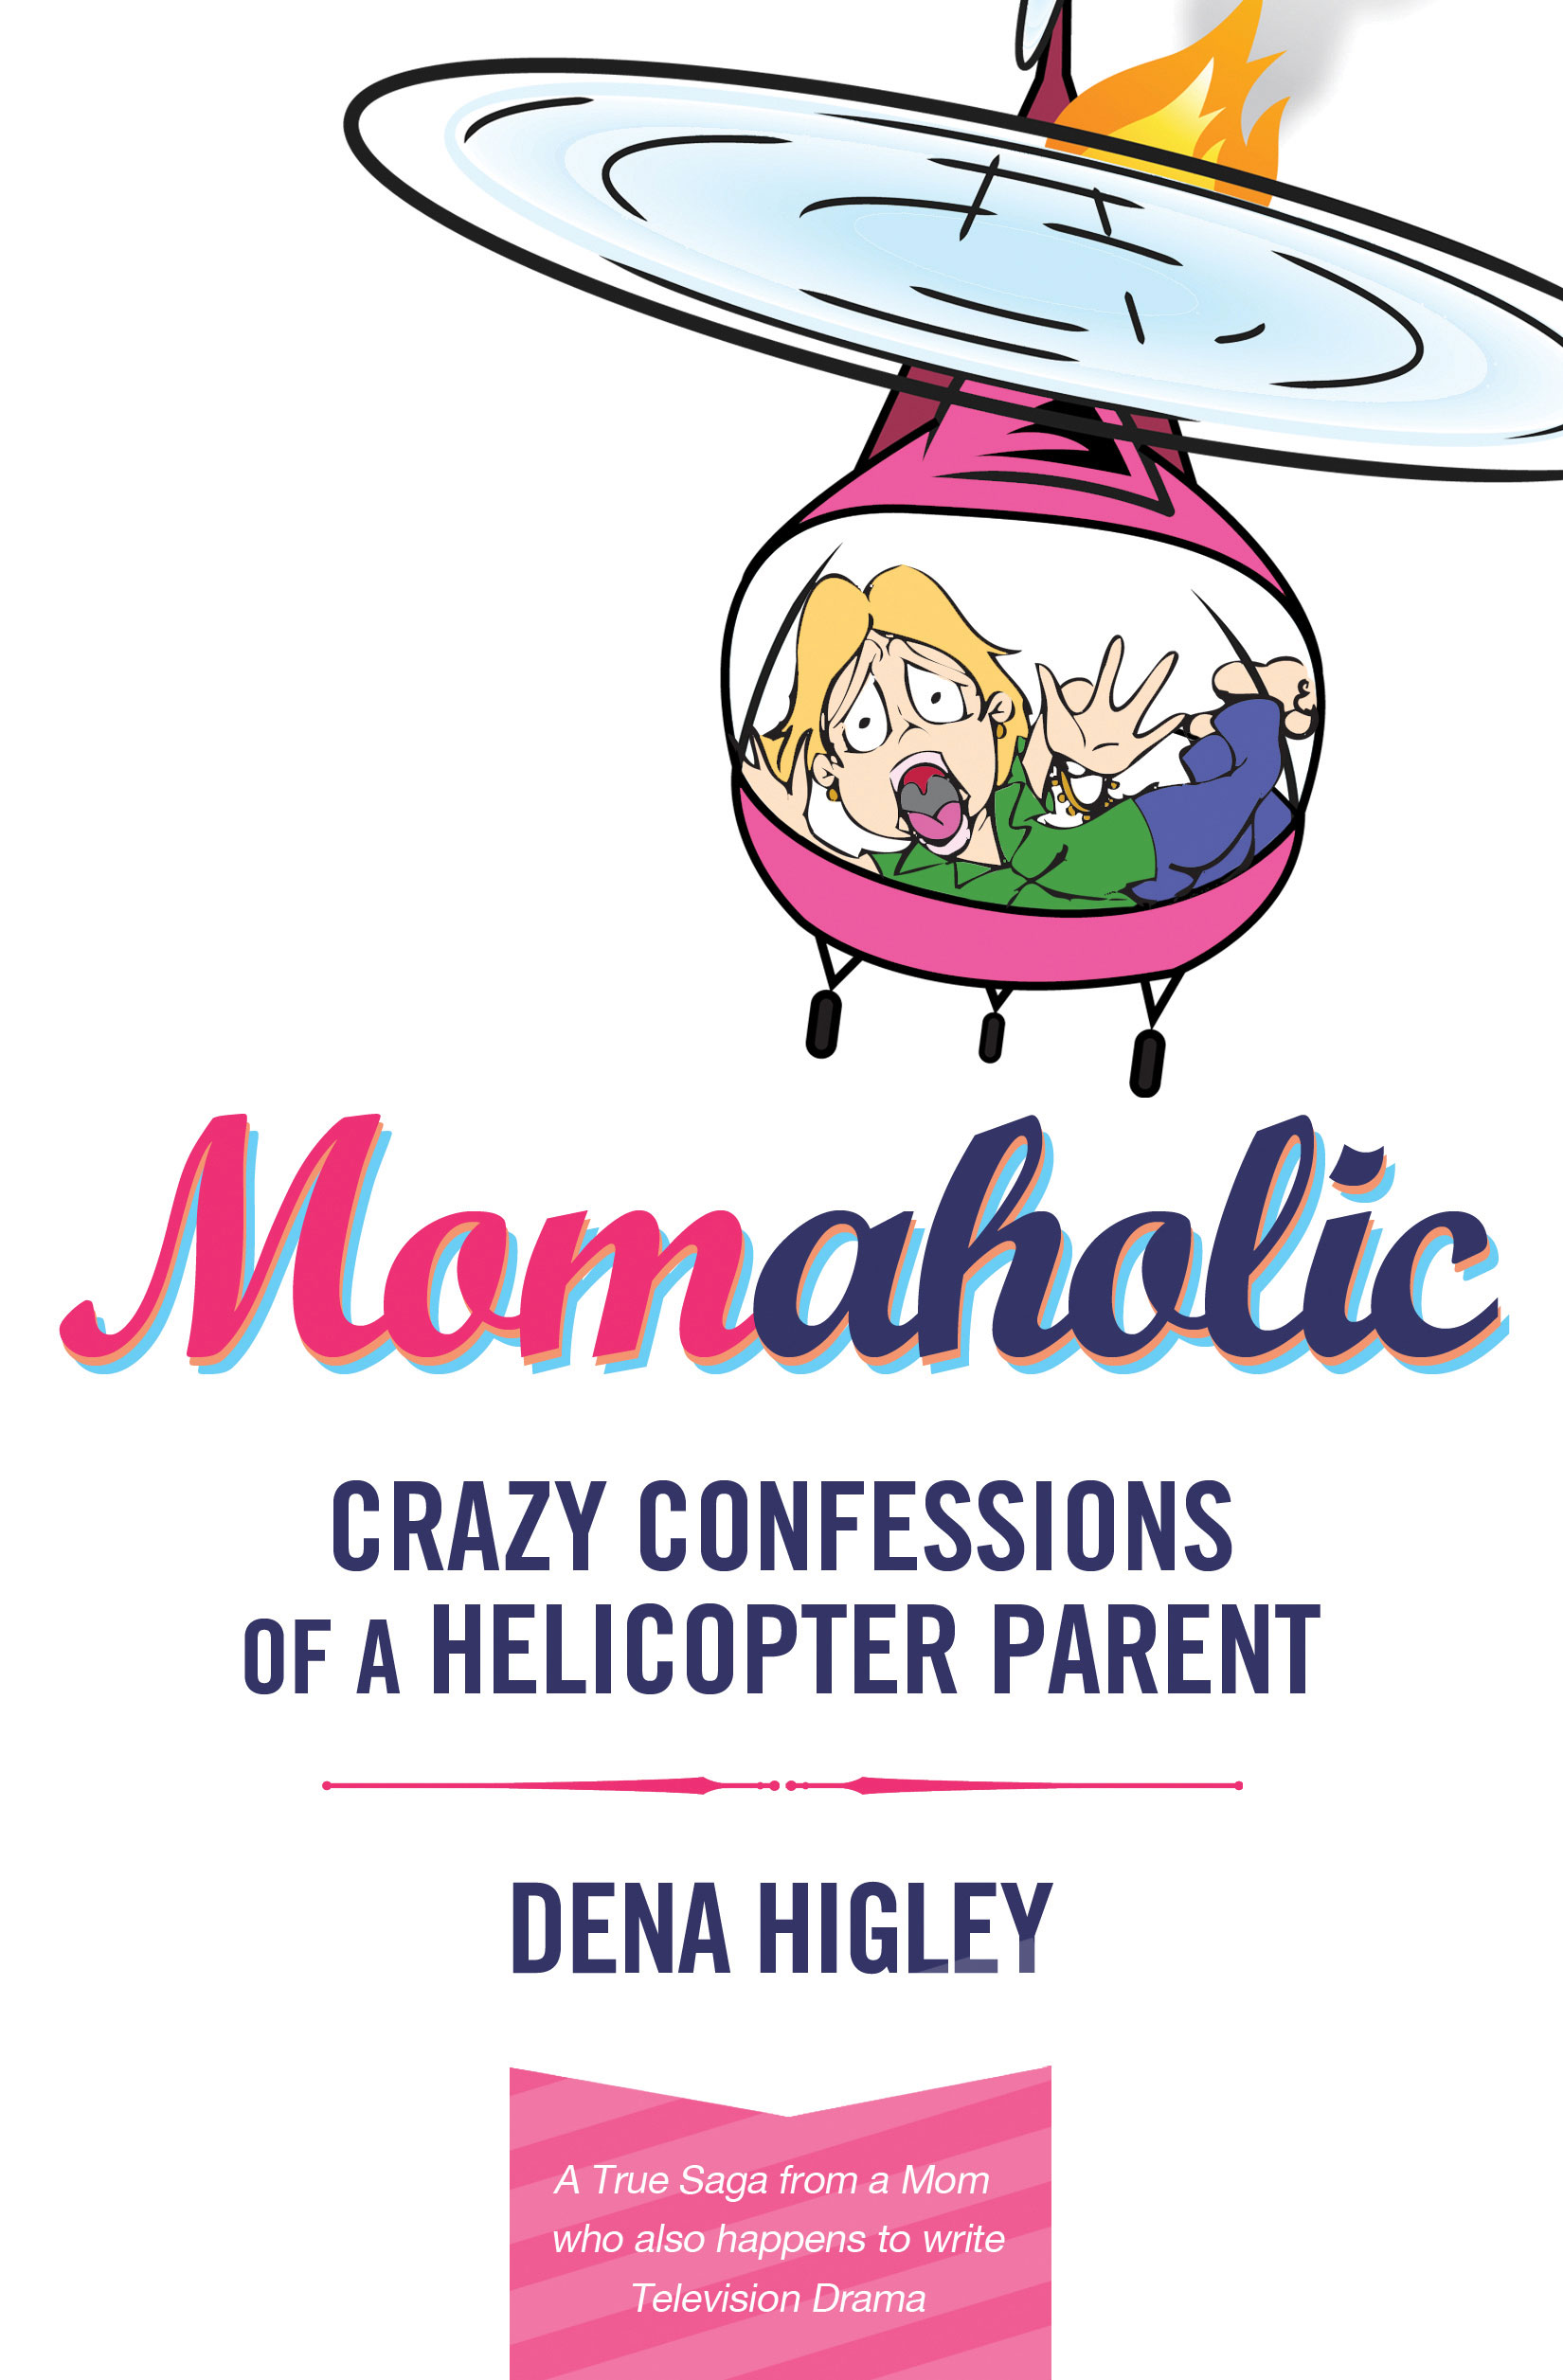 momaholic helicopter mom book